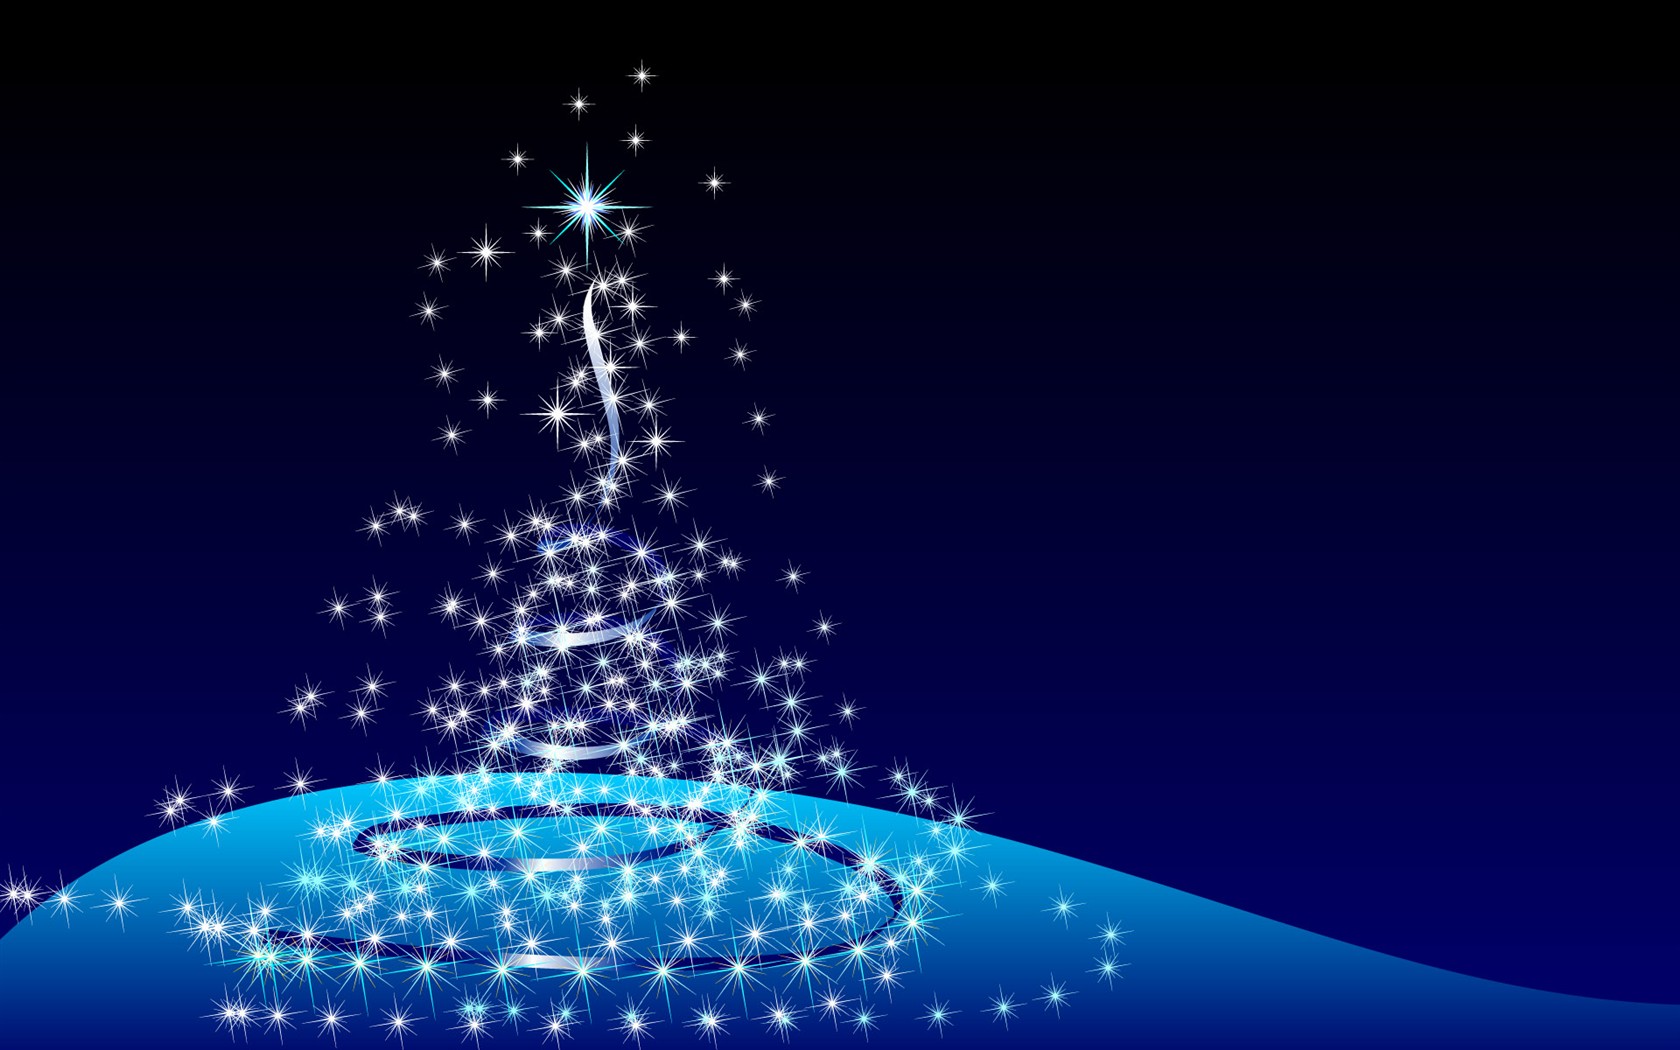 Exquisite Christmas Theme HD Wallpapers #2 - 1680x1050